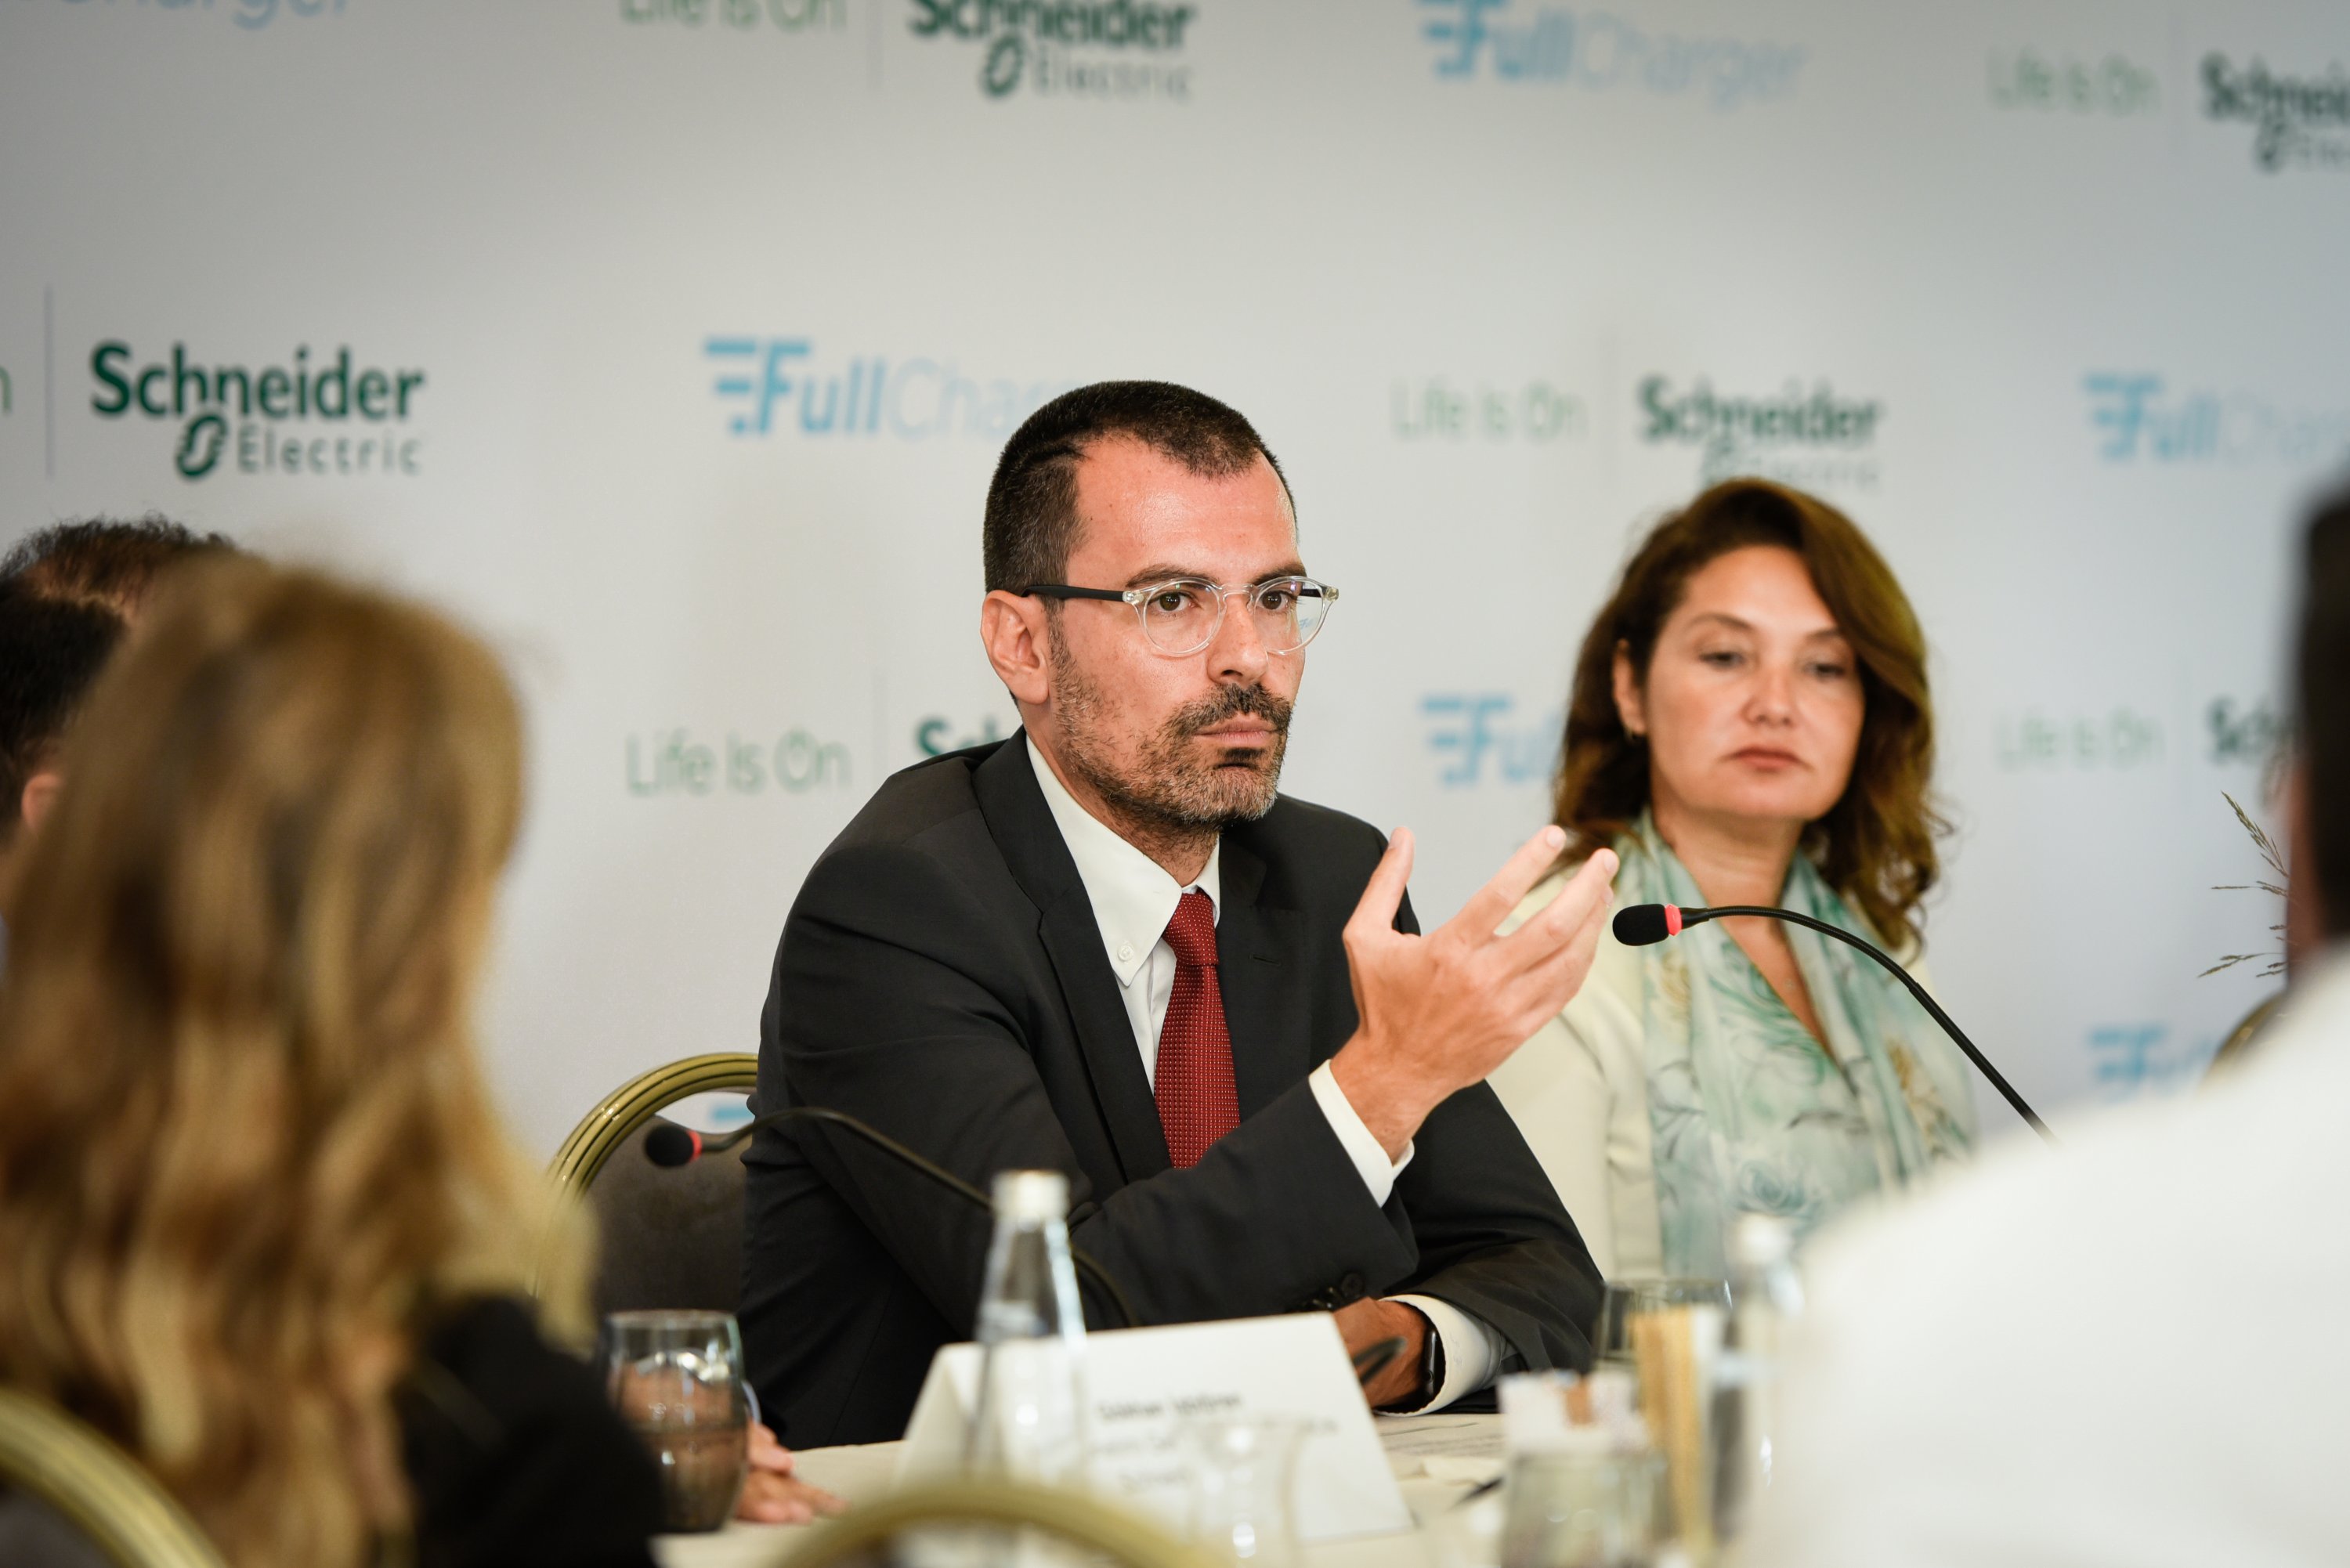 Schneider Electric Turkey General Manager Ismail Yamangil speaks during an event in Istanbul, June 29, 2022. (Courtesy of Schneider Electric)